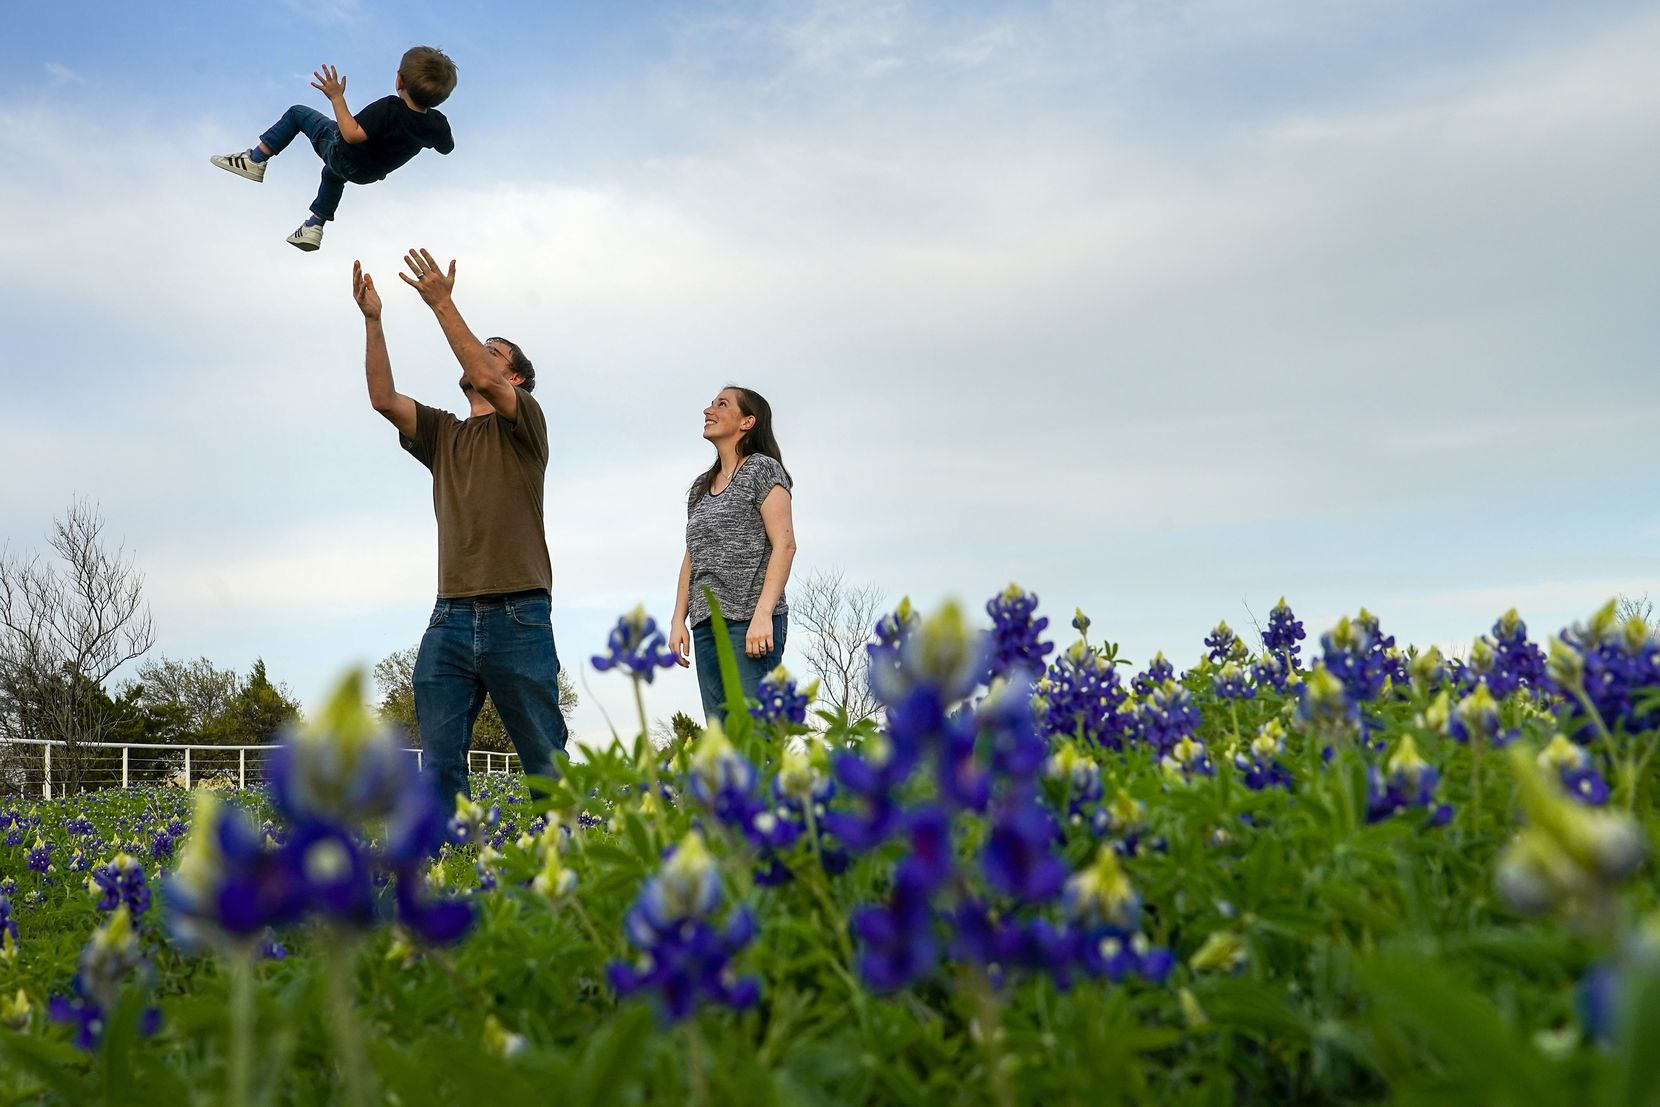 John Wallace tossed his son Ryan, 3, into the air as he and his wife Kim, stood in a field of bluebonnets near Zion Cemetery in Frisco. In a springtime tradition, the family visits the same field every year for a new photo.